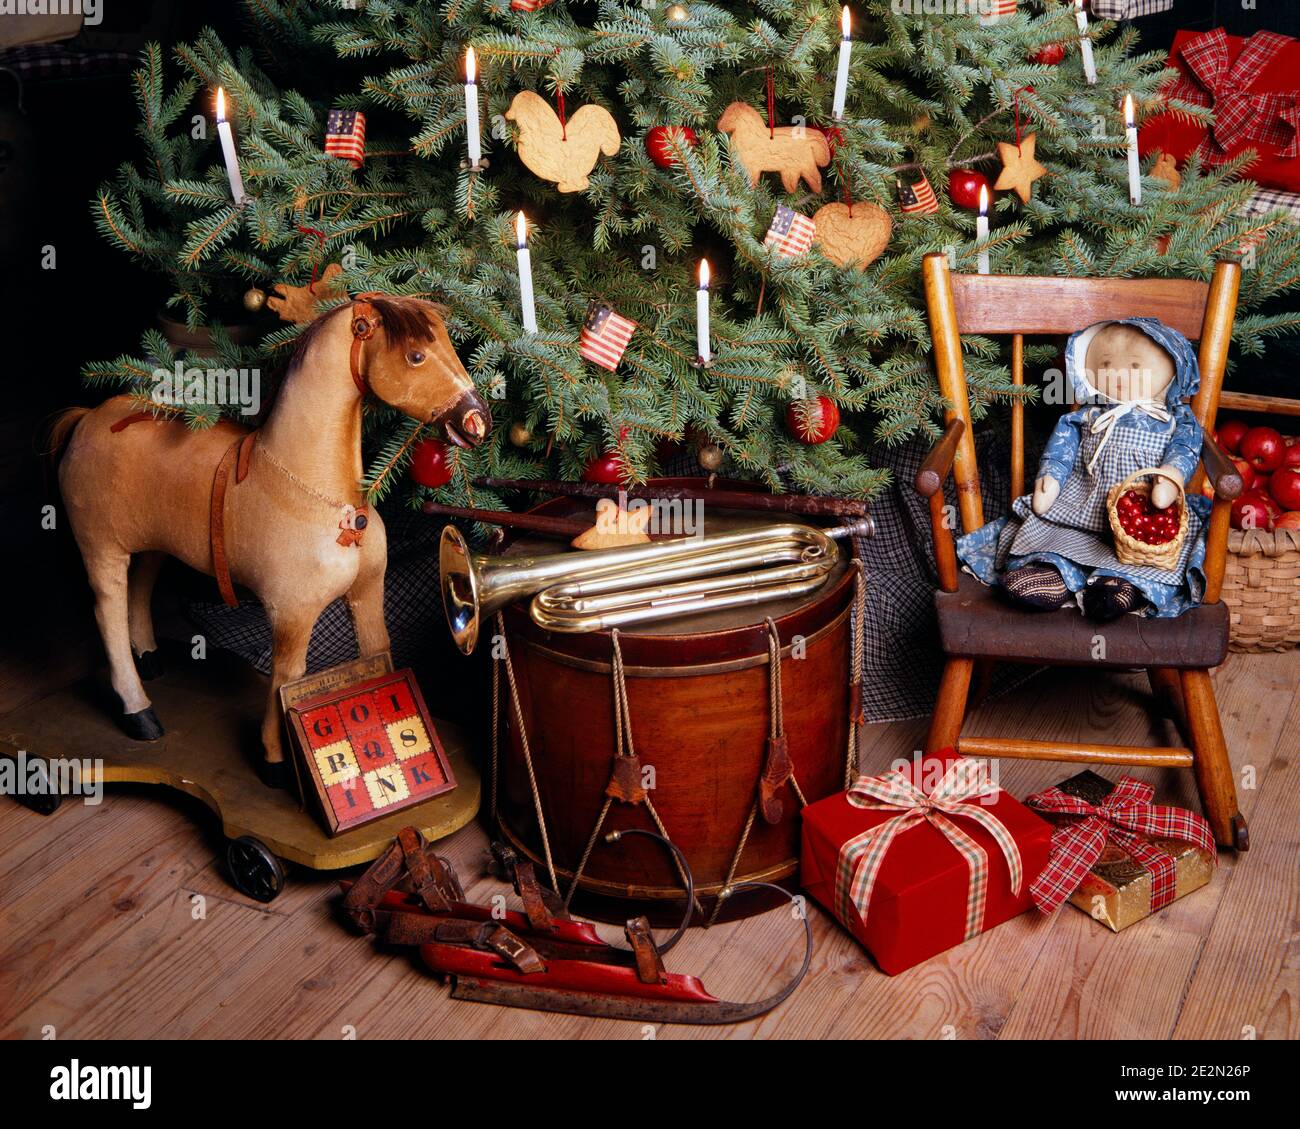 1980s ANTIQUE TOYS MUSICAL INSTRUMENTS UNDER A BLUE SPRUCE CHRISTMAS TREE DECORATED WITH SUGAR COOKIES APPLES AND LIT CANDLES - kx9753 TEU001 HARS MERRY AND LIT DIRECTION A PAINTED SPRUCE DECEMBER CONNECTION CONCEPTUAL DECEMBER 25 STILL LIFE STYLISH HOBBY HORSE RAG DOLL BUGLE JOYOUS ICE SKATES OLD FASHIONED Stock Photo